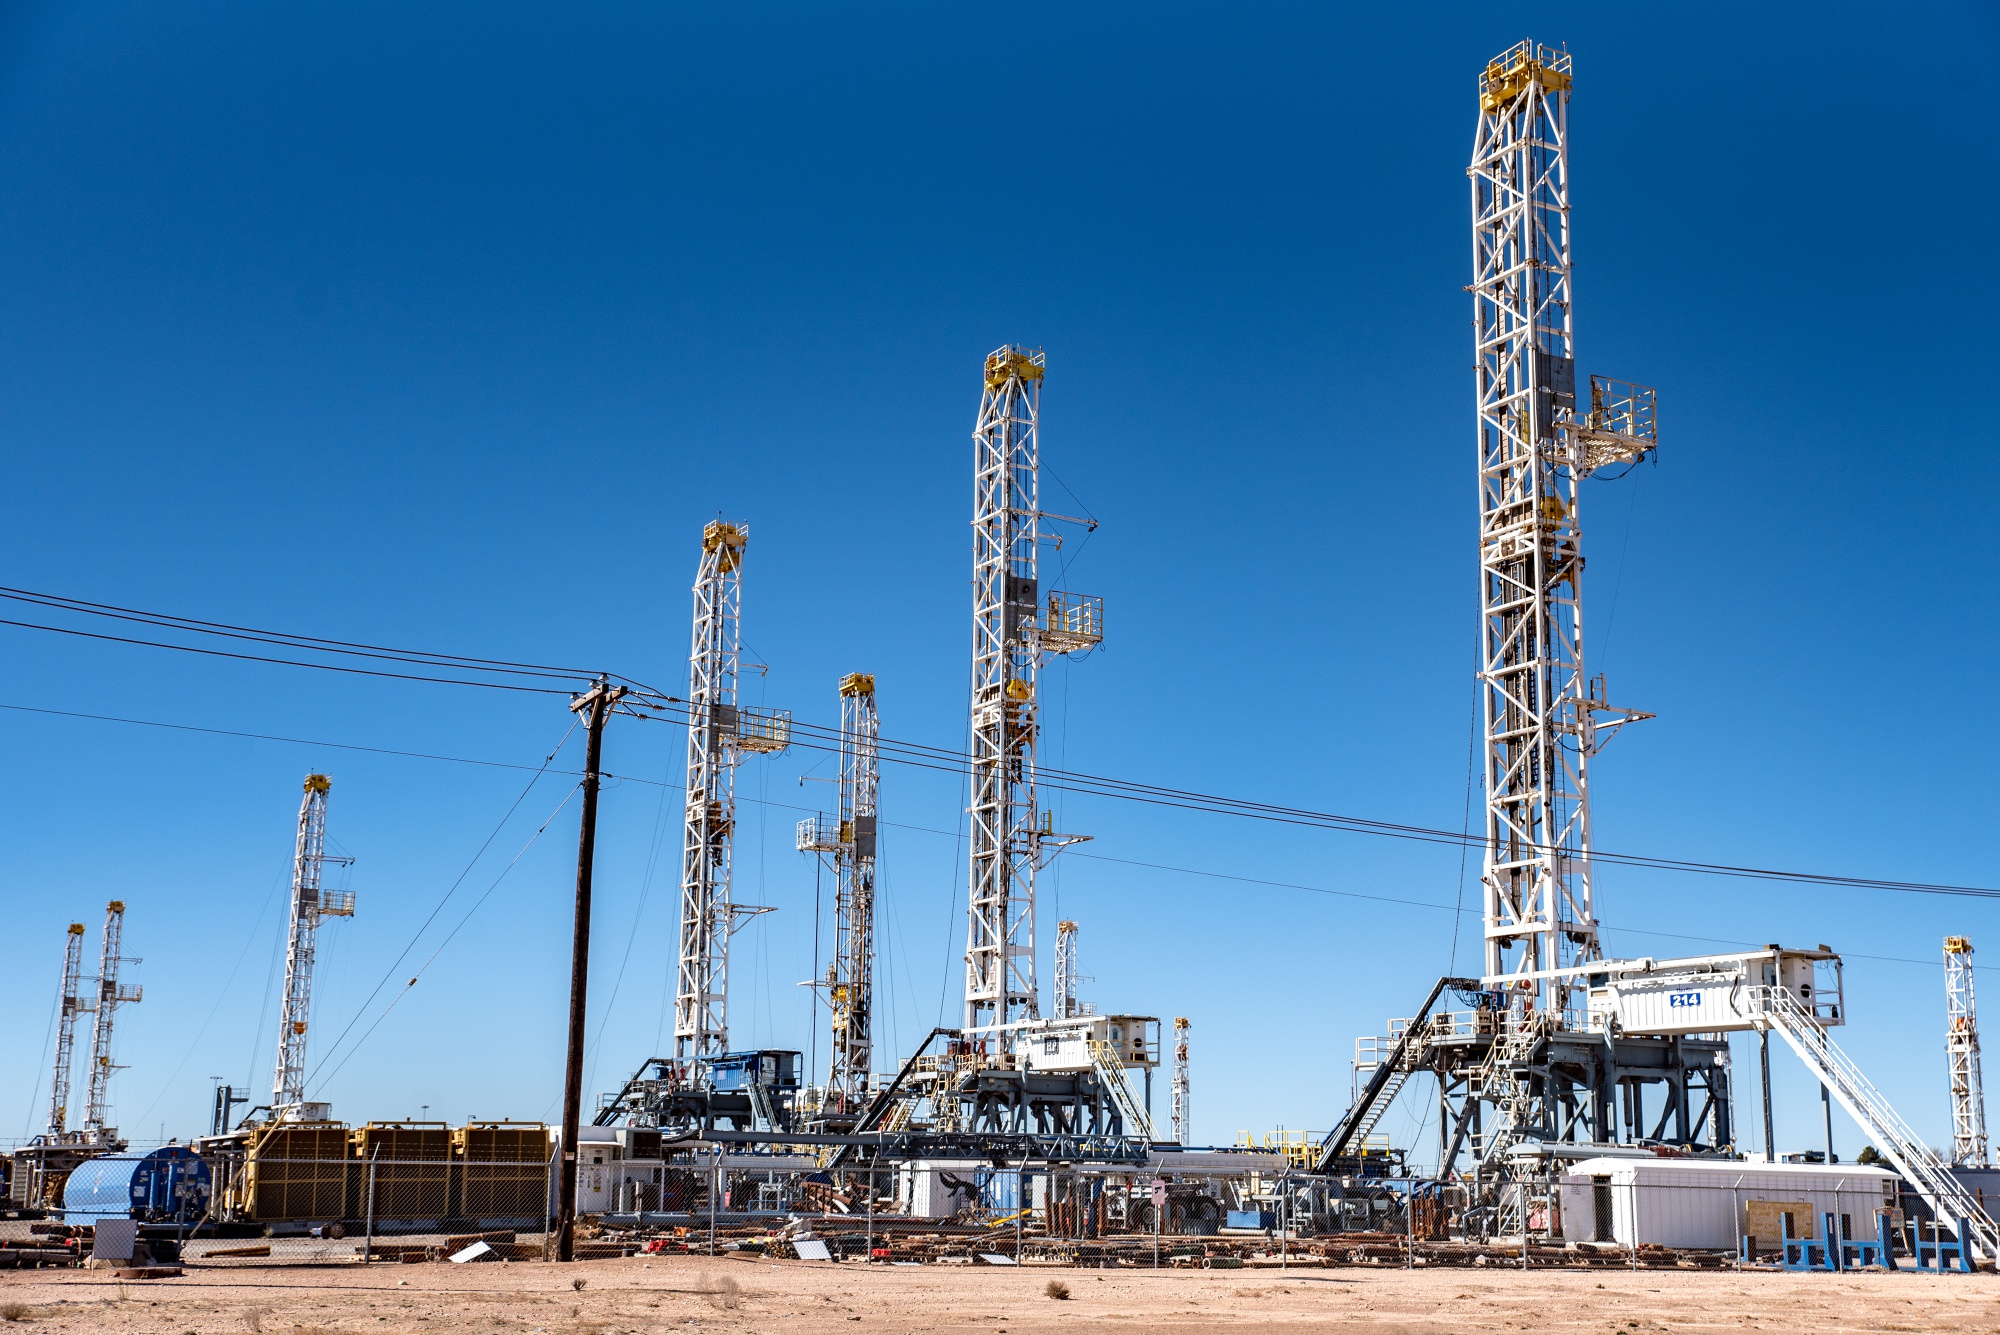 Oil rigs in the Permian Basin of West Texas